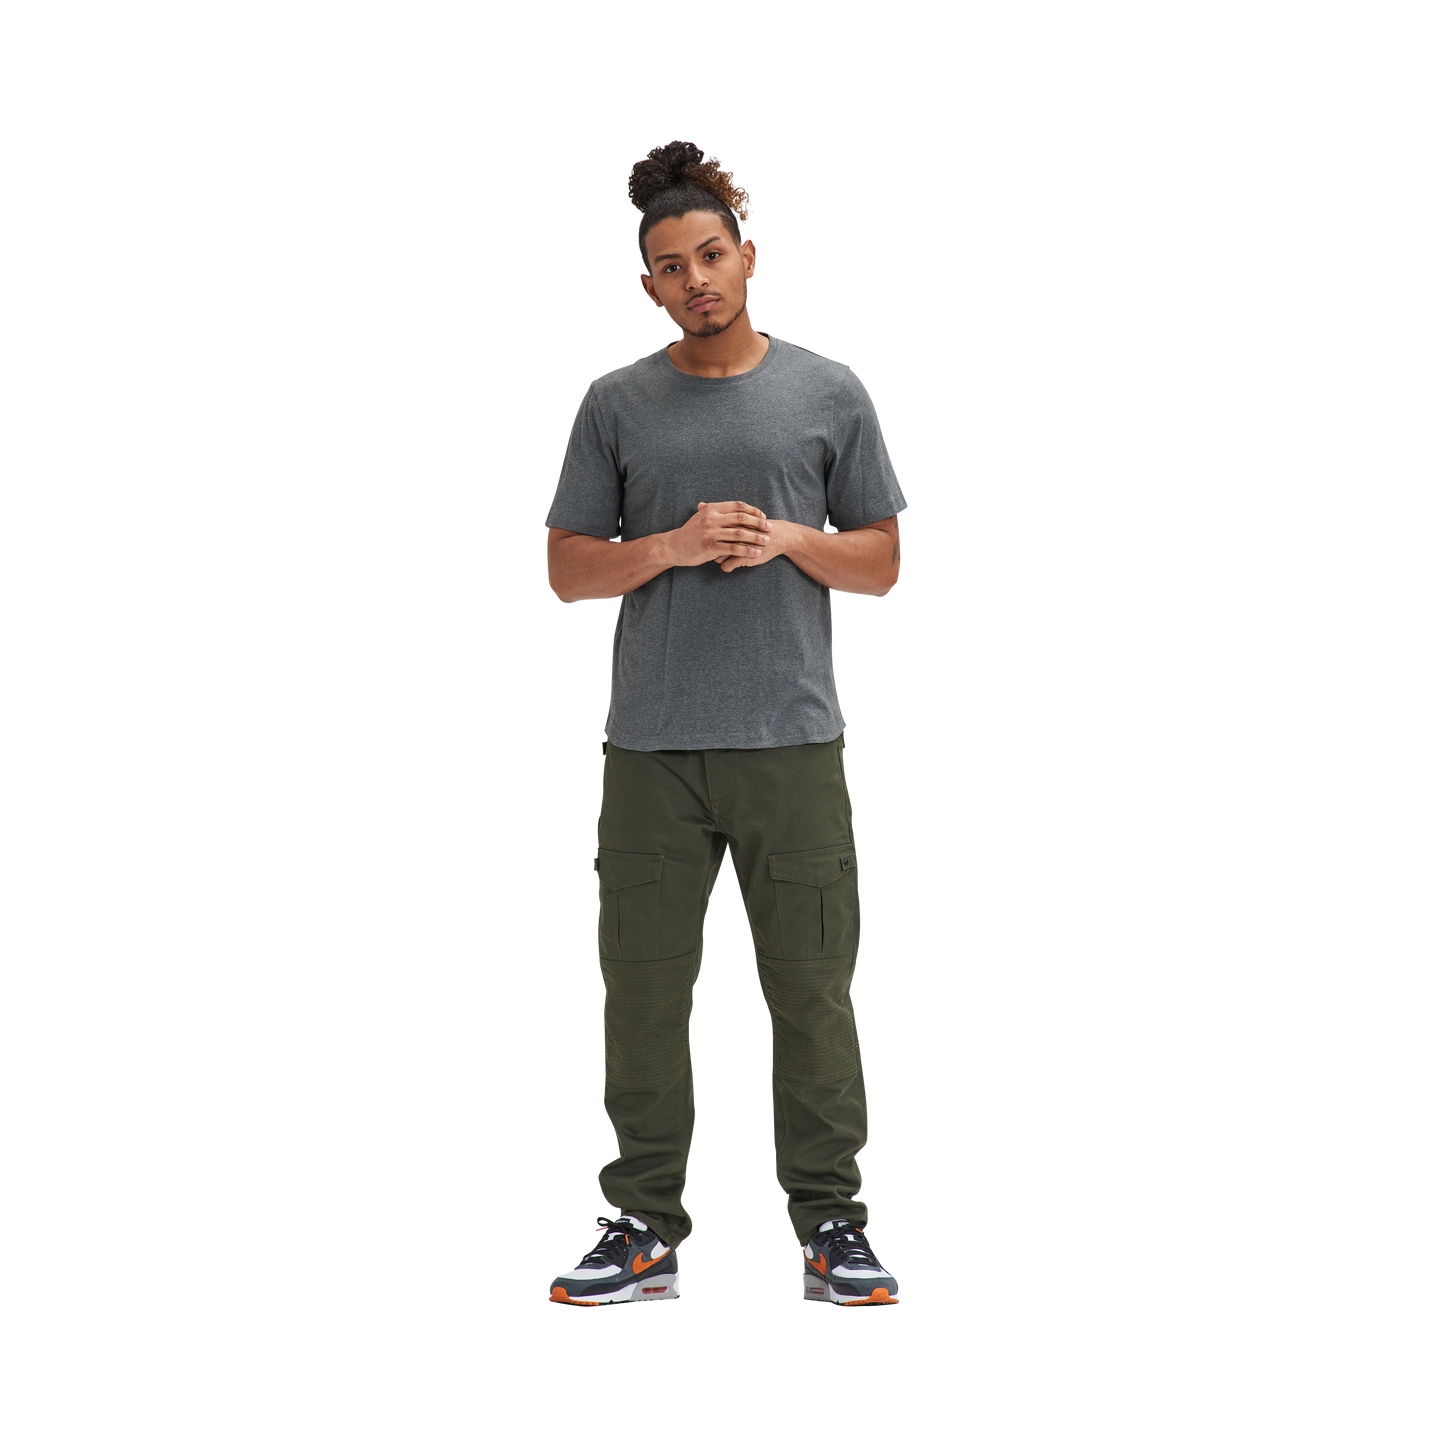 A man standing in front of a white background wearing a Kulture MIA Drop Cut Tee (3) PK Black / Charcoal / Heather and jogging pants.